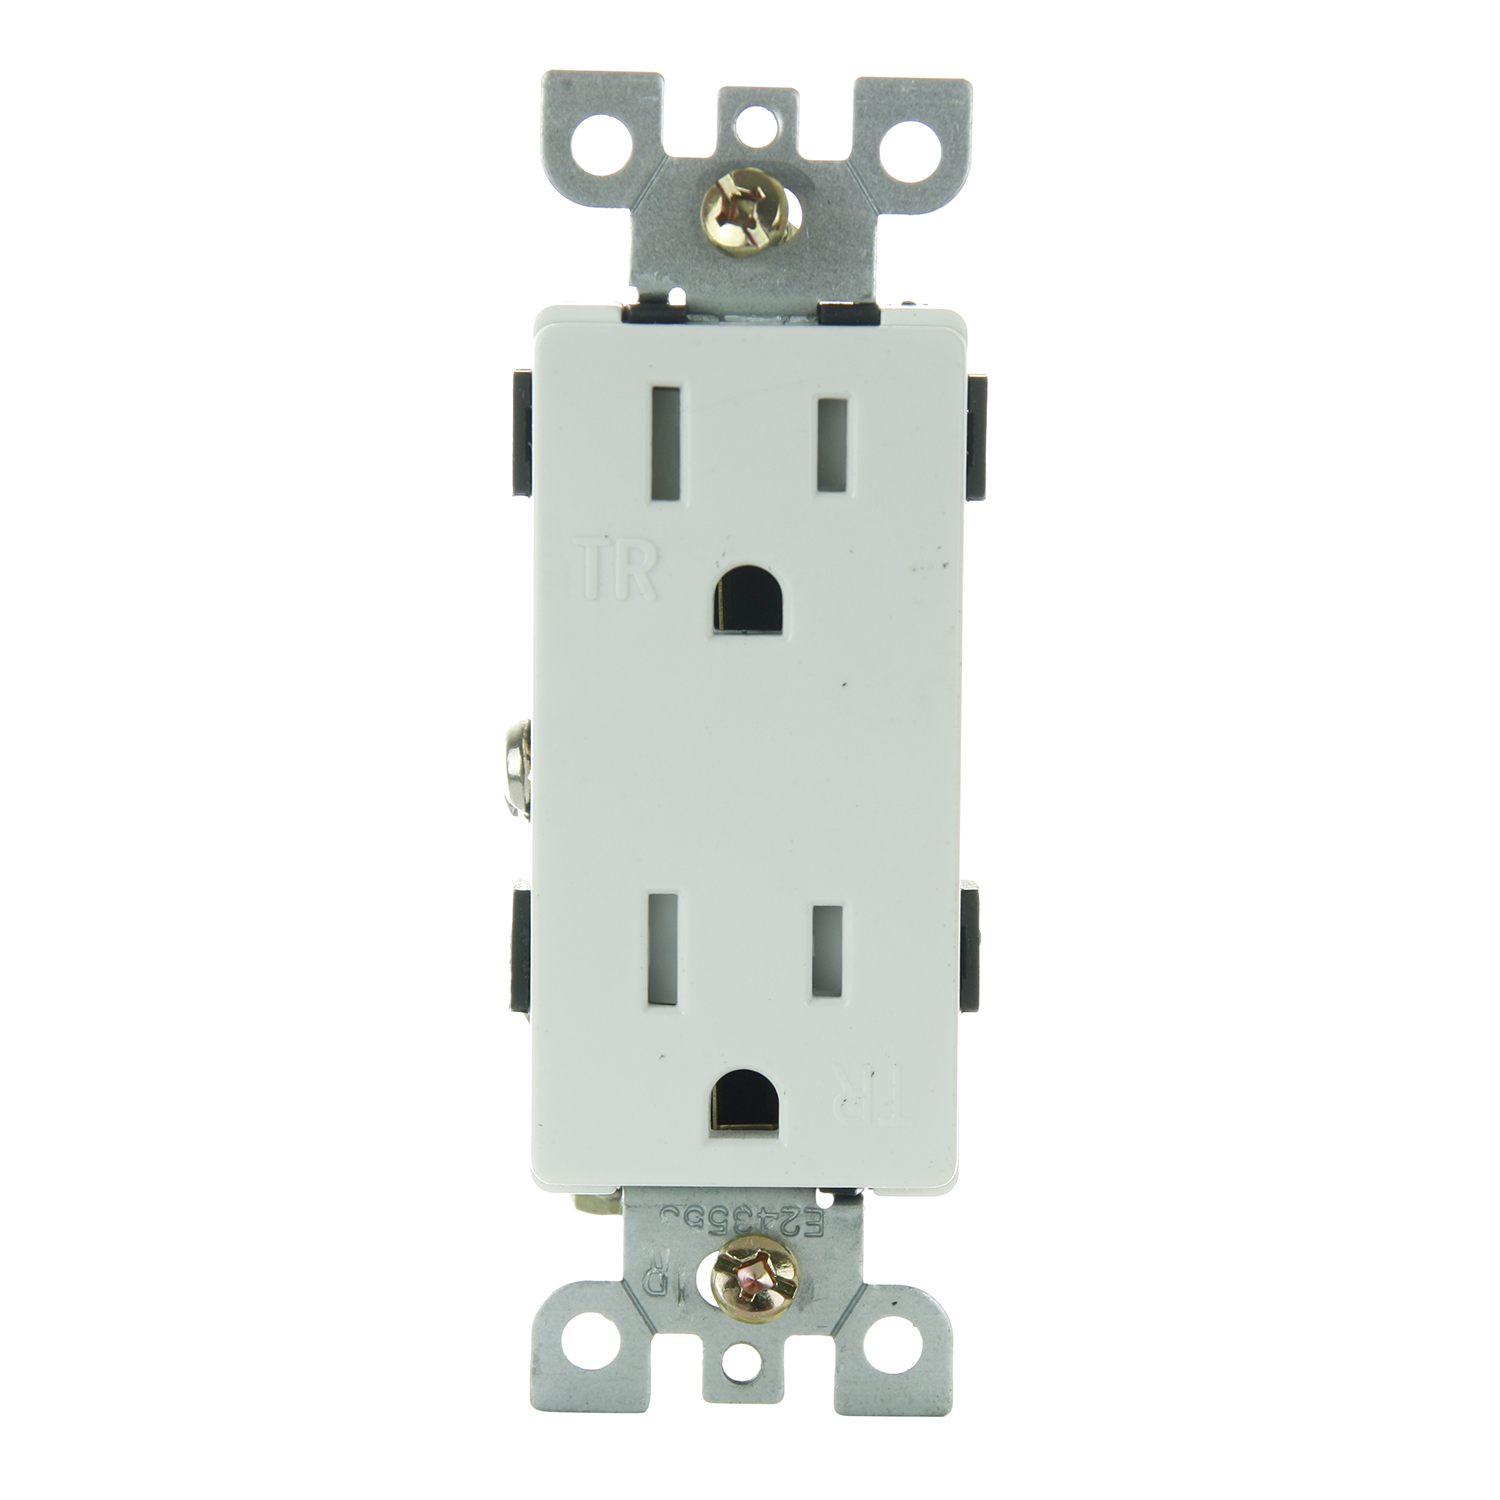 Outlet, UL Listed,15 Amp, 125 Volts, Grounded, Modern Design Wht - Click Image to Close